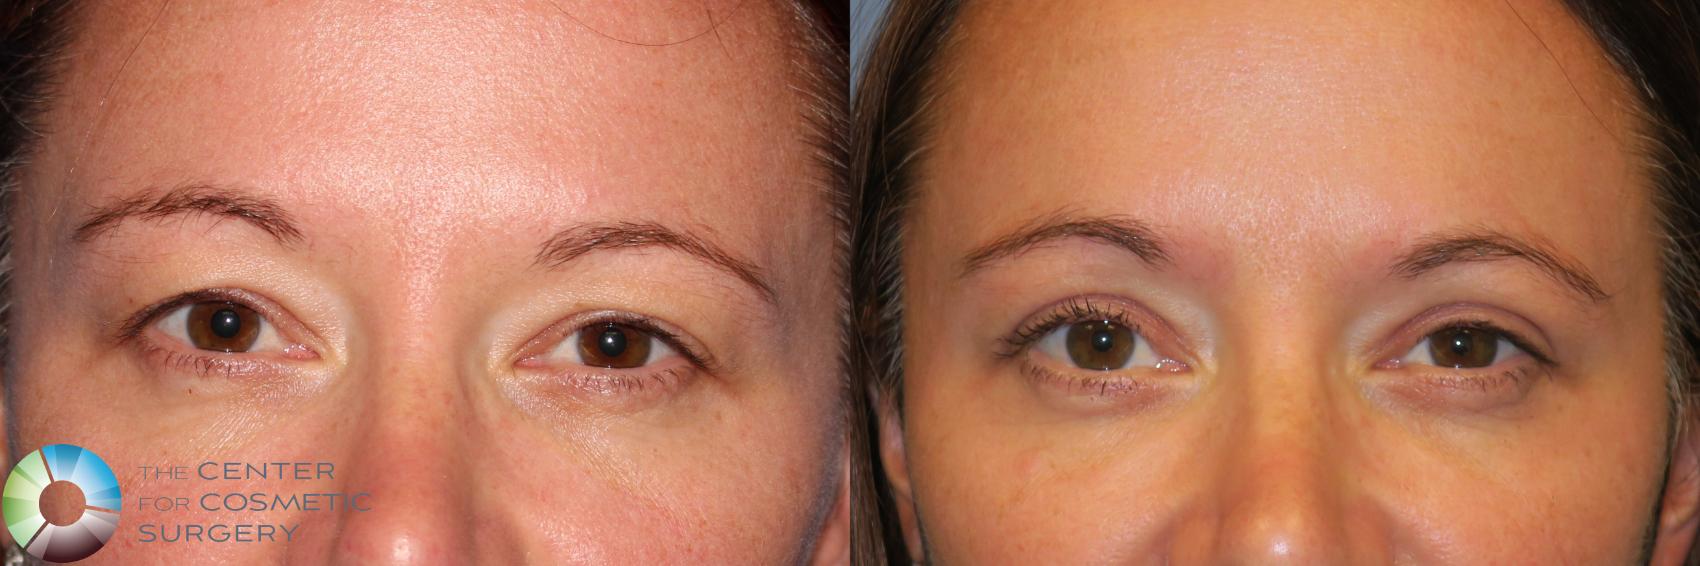 Before & After Eyelid Lift Case 11733 Close-Up View in Golden, CO